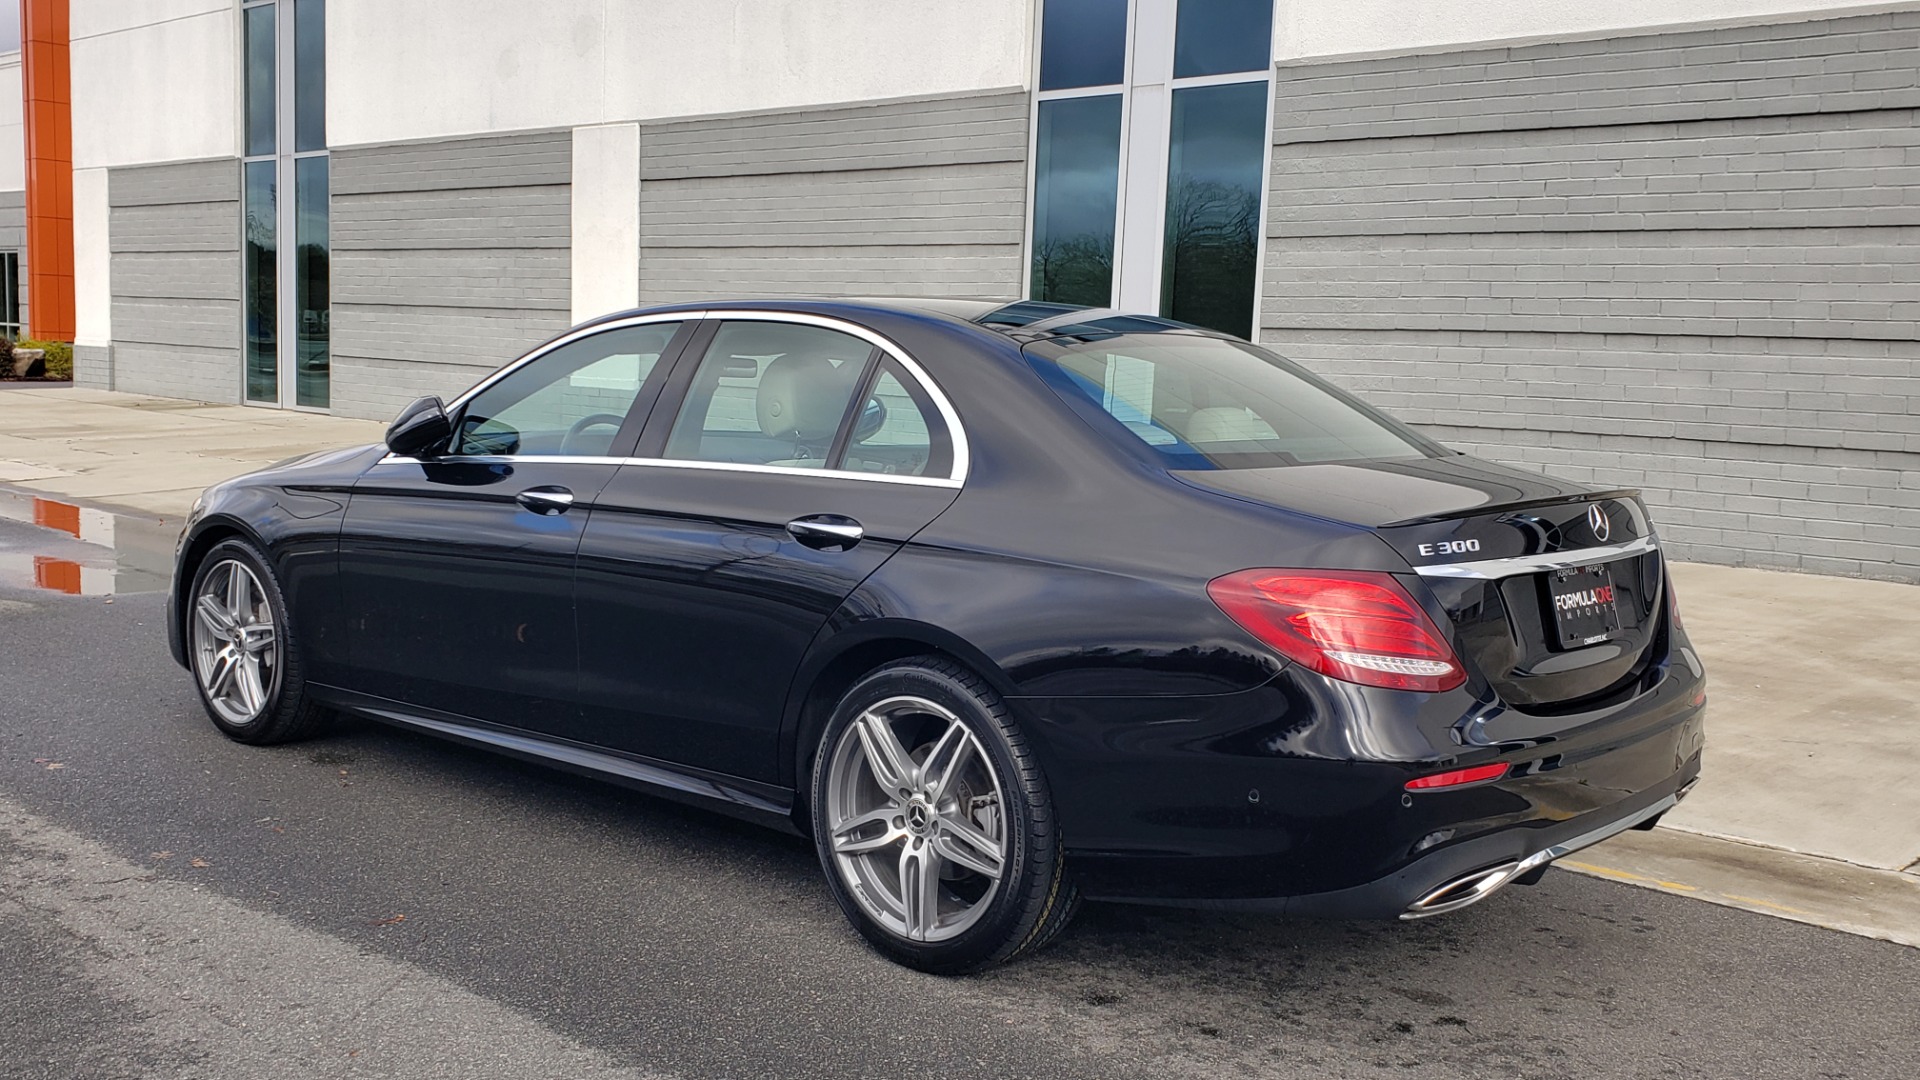 Used 2018 Mercedes-Benz E-CLASS E 300 PREM PKG 2 / NAV / PANO-ROOF / WARMTH & COMFORT PKG for sale Sold at Formula Imports in Charlotte NC 28227 8